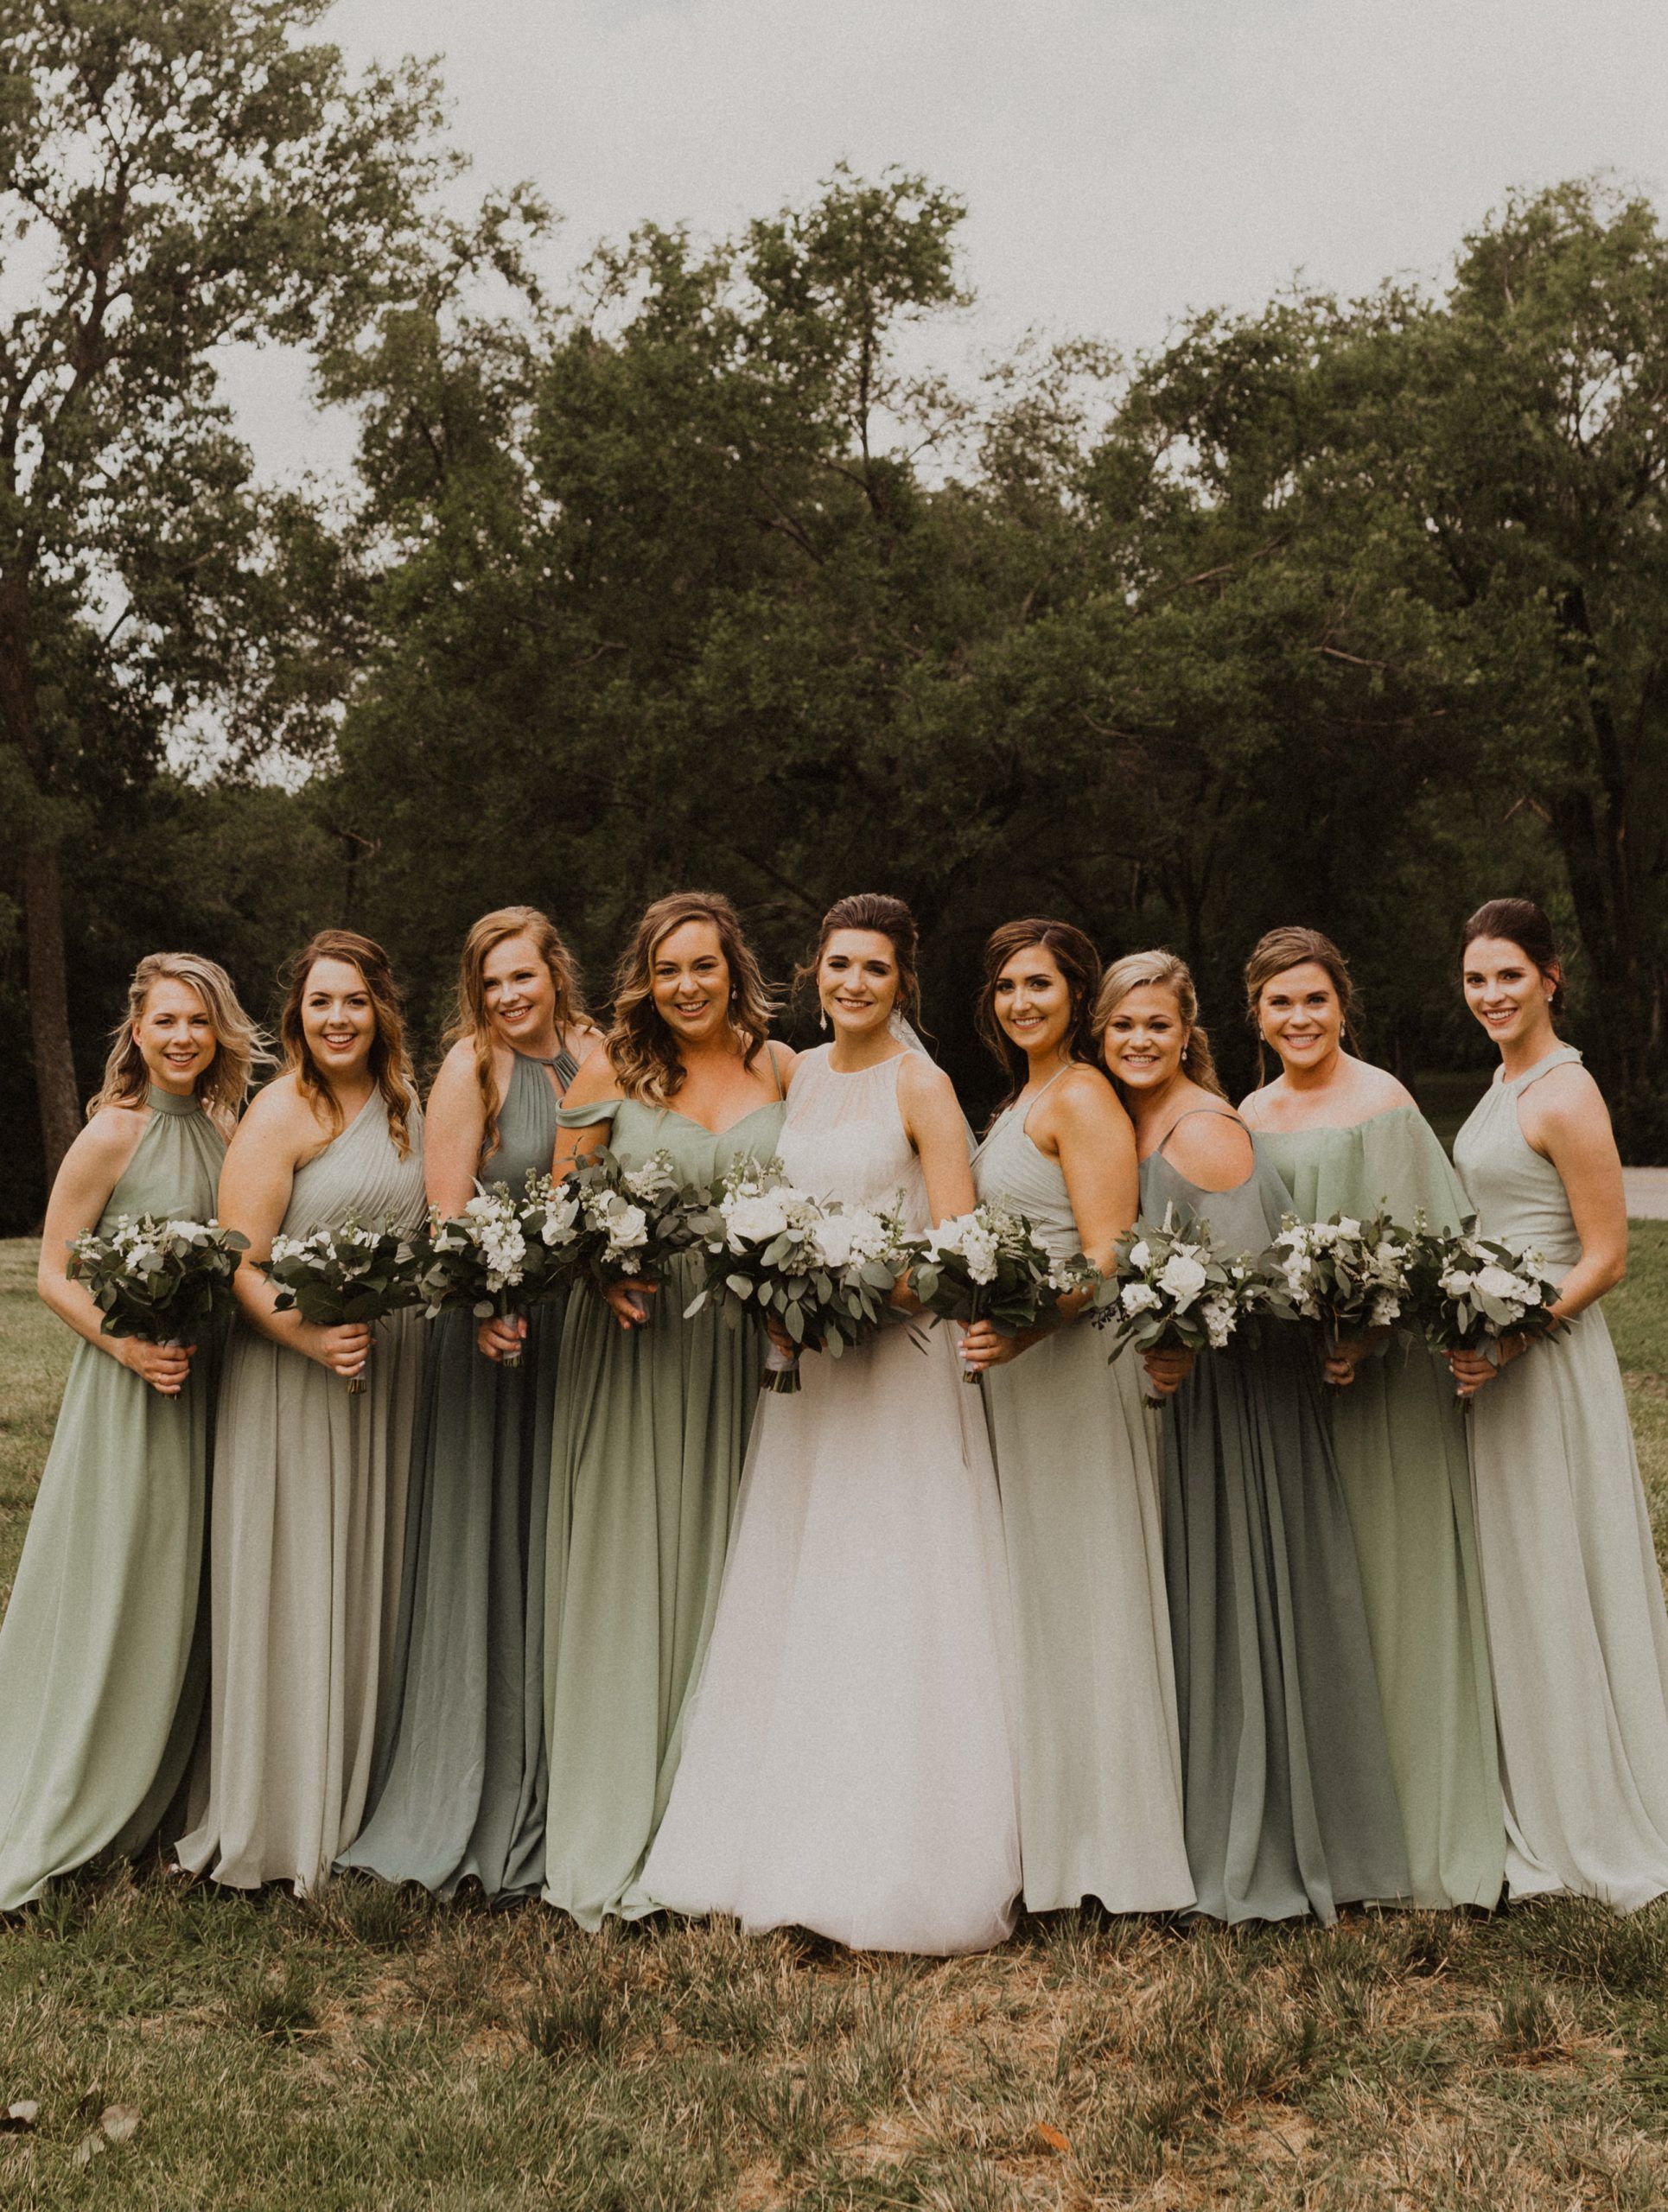 How to pulling off mismatched bridesmaid dresses perfectly | Tulle & Chantilly Wedding Blog -   16 sage green bridesmaid dresses fall ideas